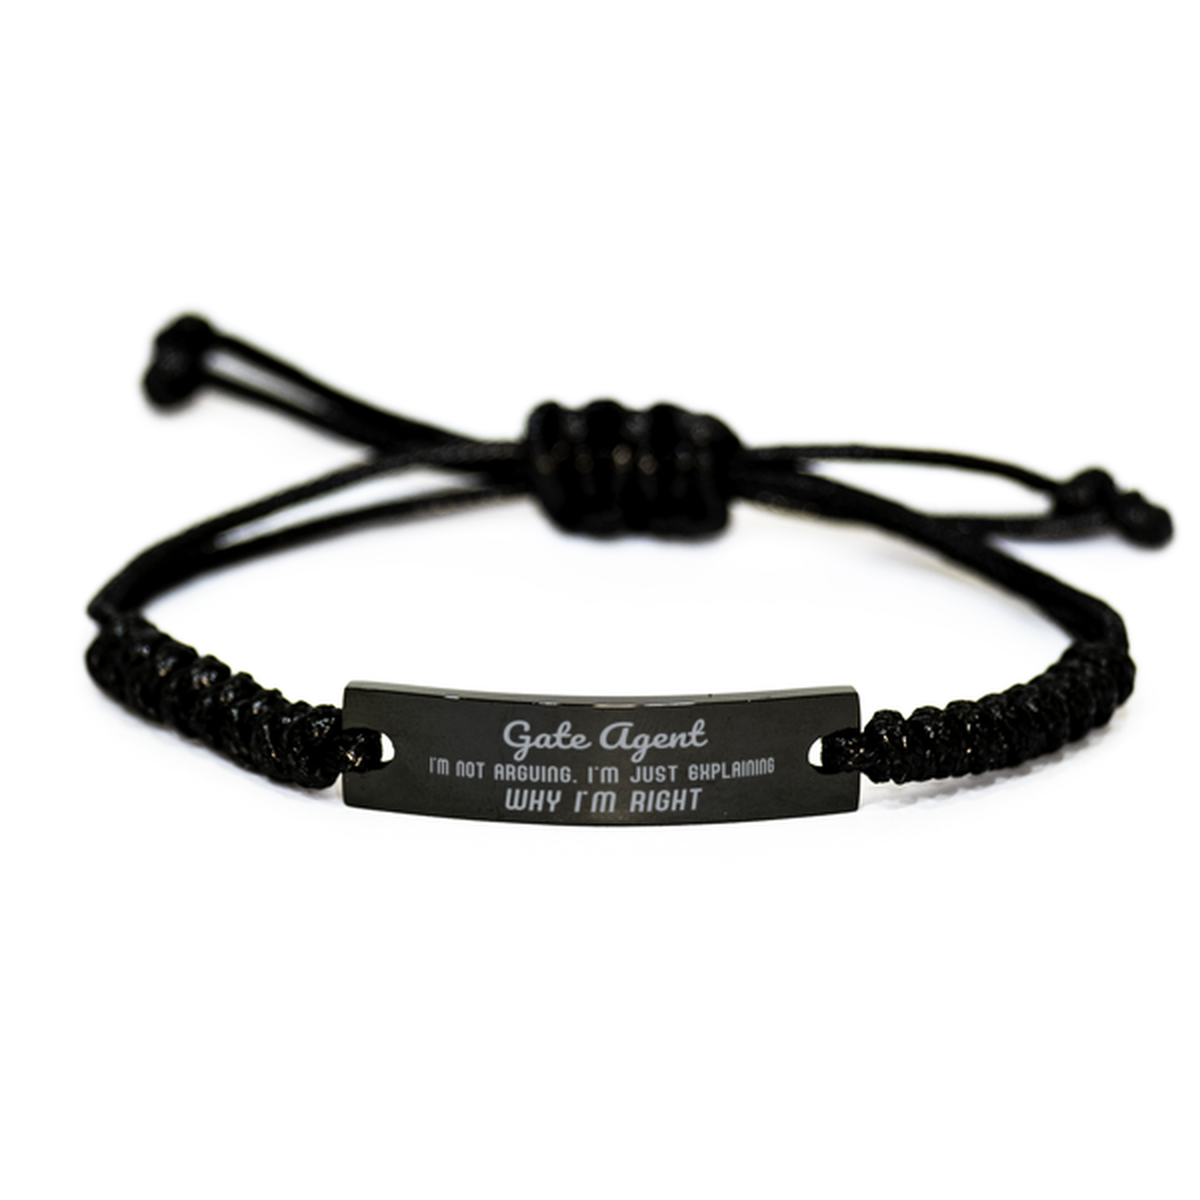 Gate Agent I'm not Arguing. I'm Just Explaining Why I'm RIGHT Black Rope Bracelet, Funny Saying Quote Gate Agent Gifts For Gate Agent Graduation Birthday Christmas Gifts for Men Women Coworker